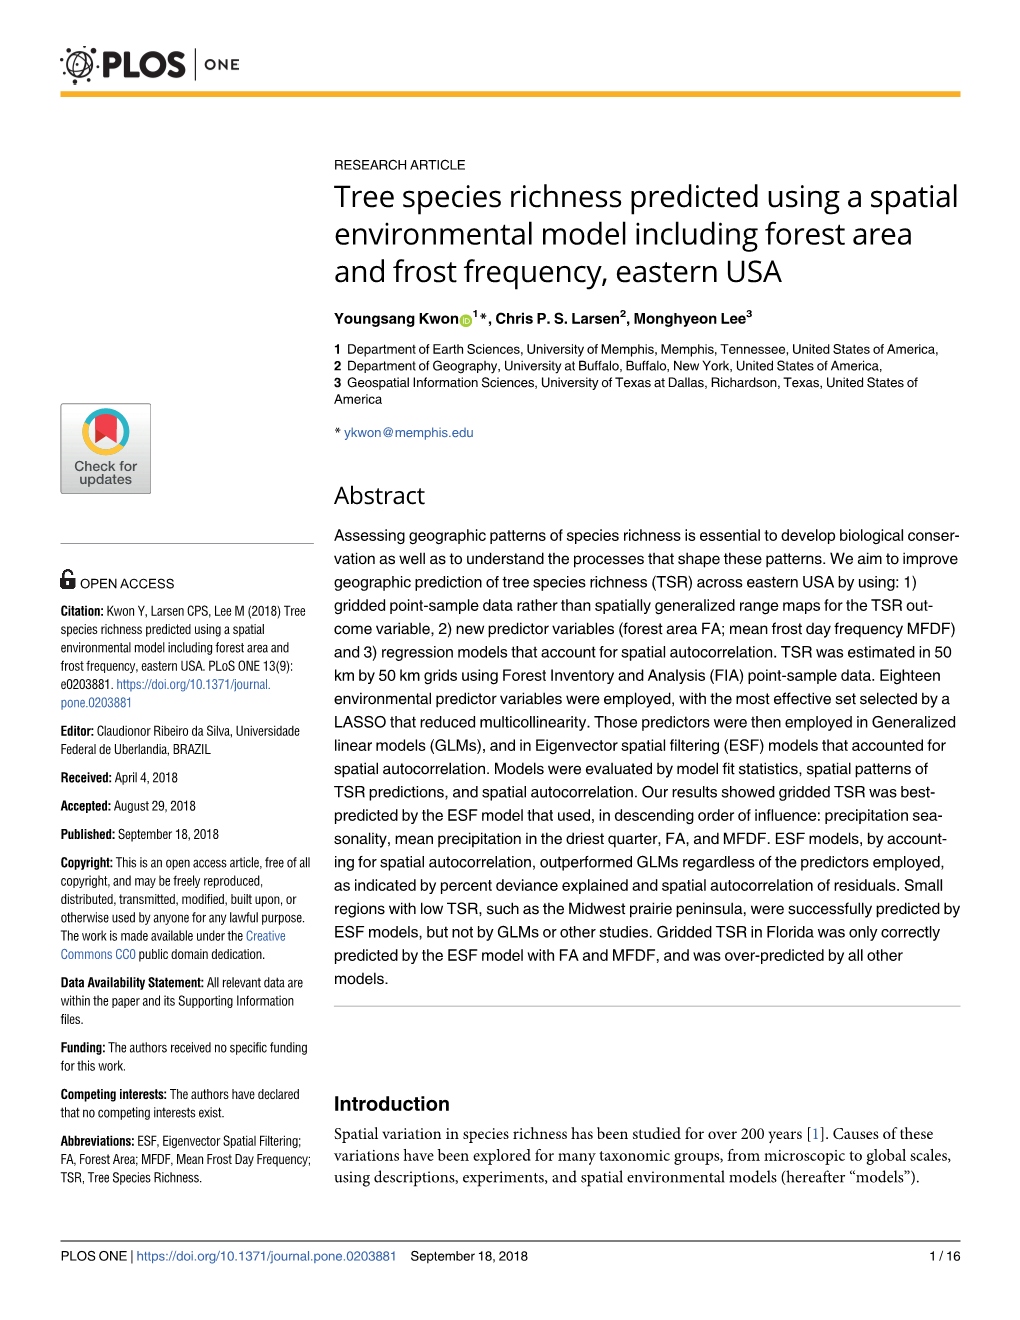 Tree Species Richness Predicted Using a Spatial Environmental Model Including Forest Area and Frost Frequency, Eastern USA